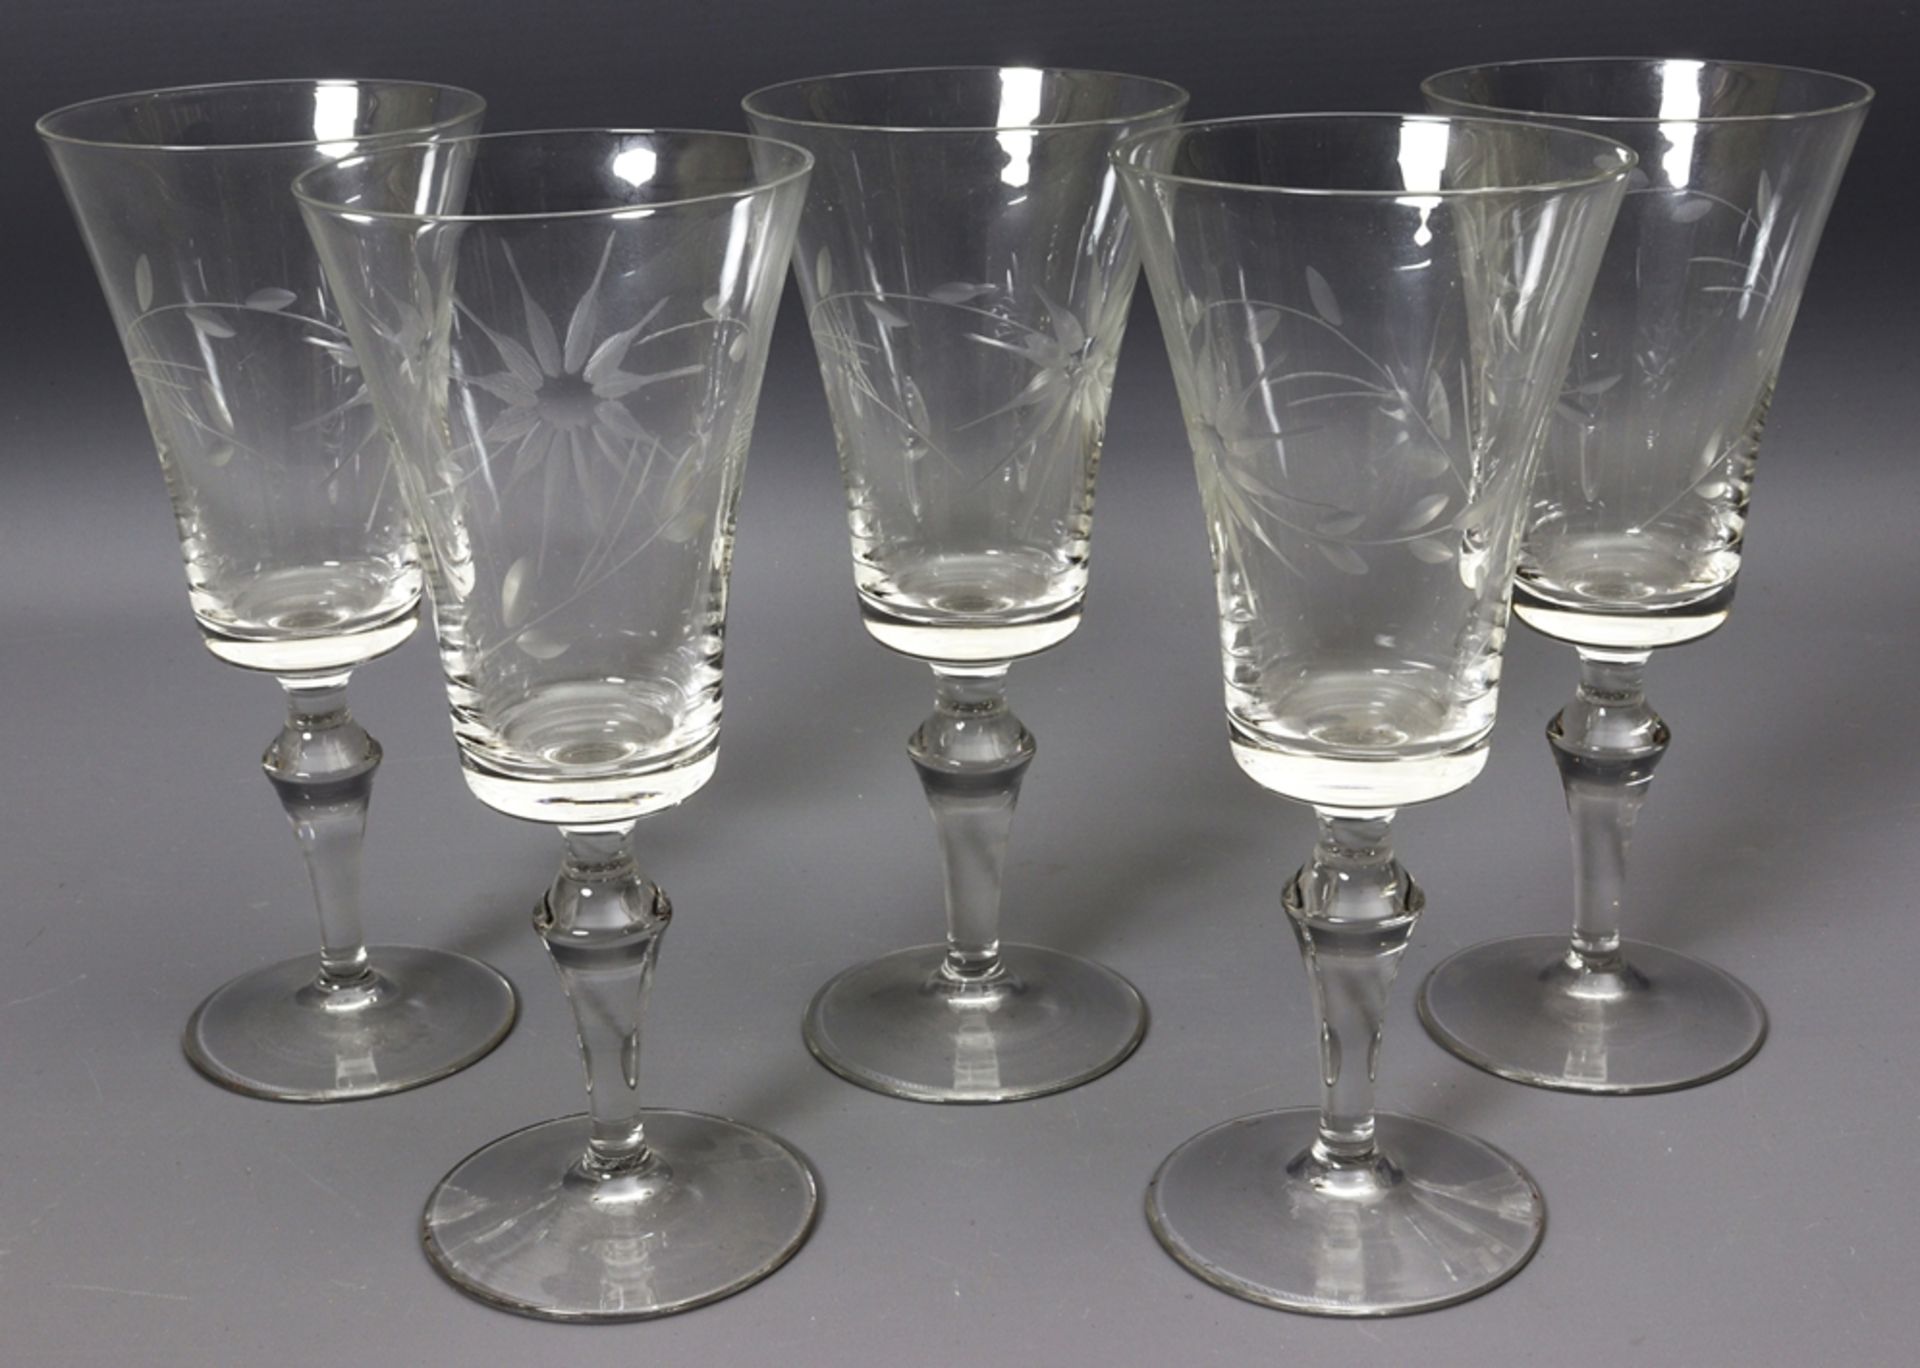 Set - five champagne flutes, early 20th c., German